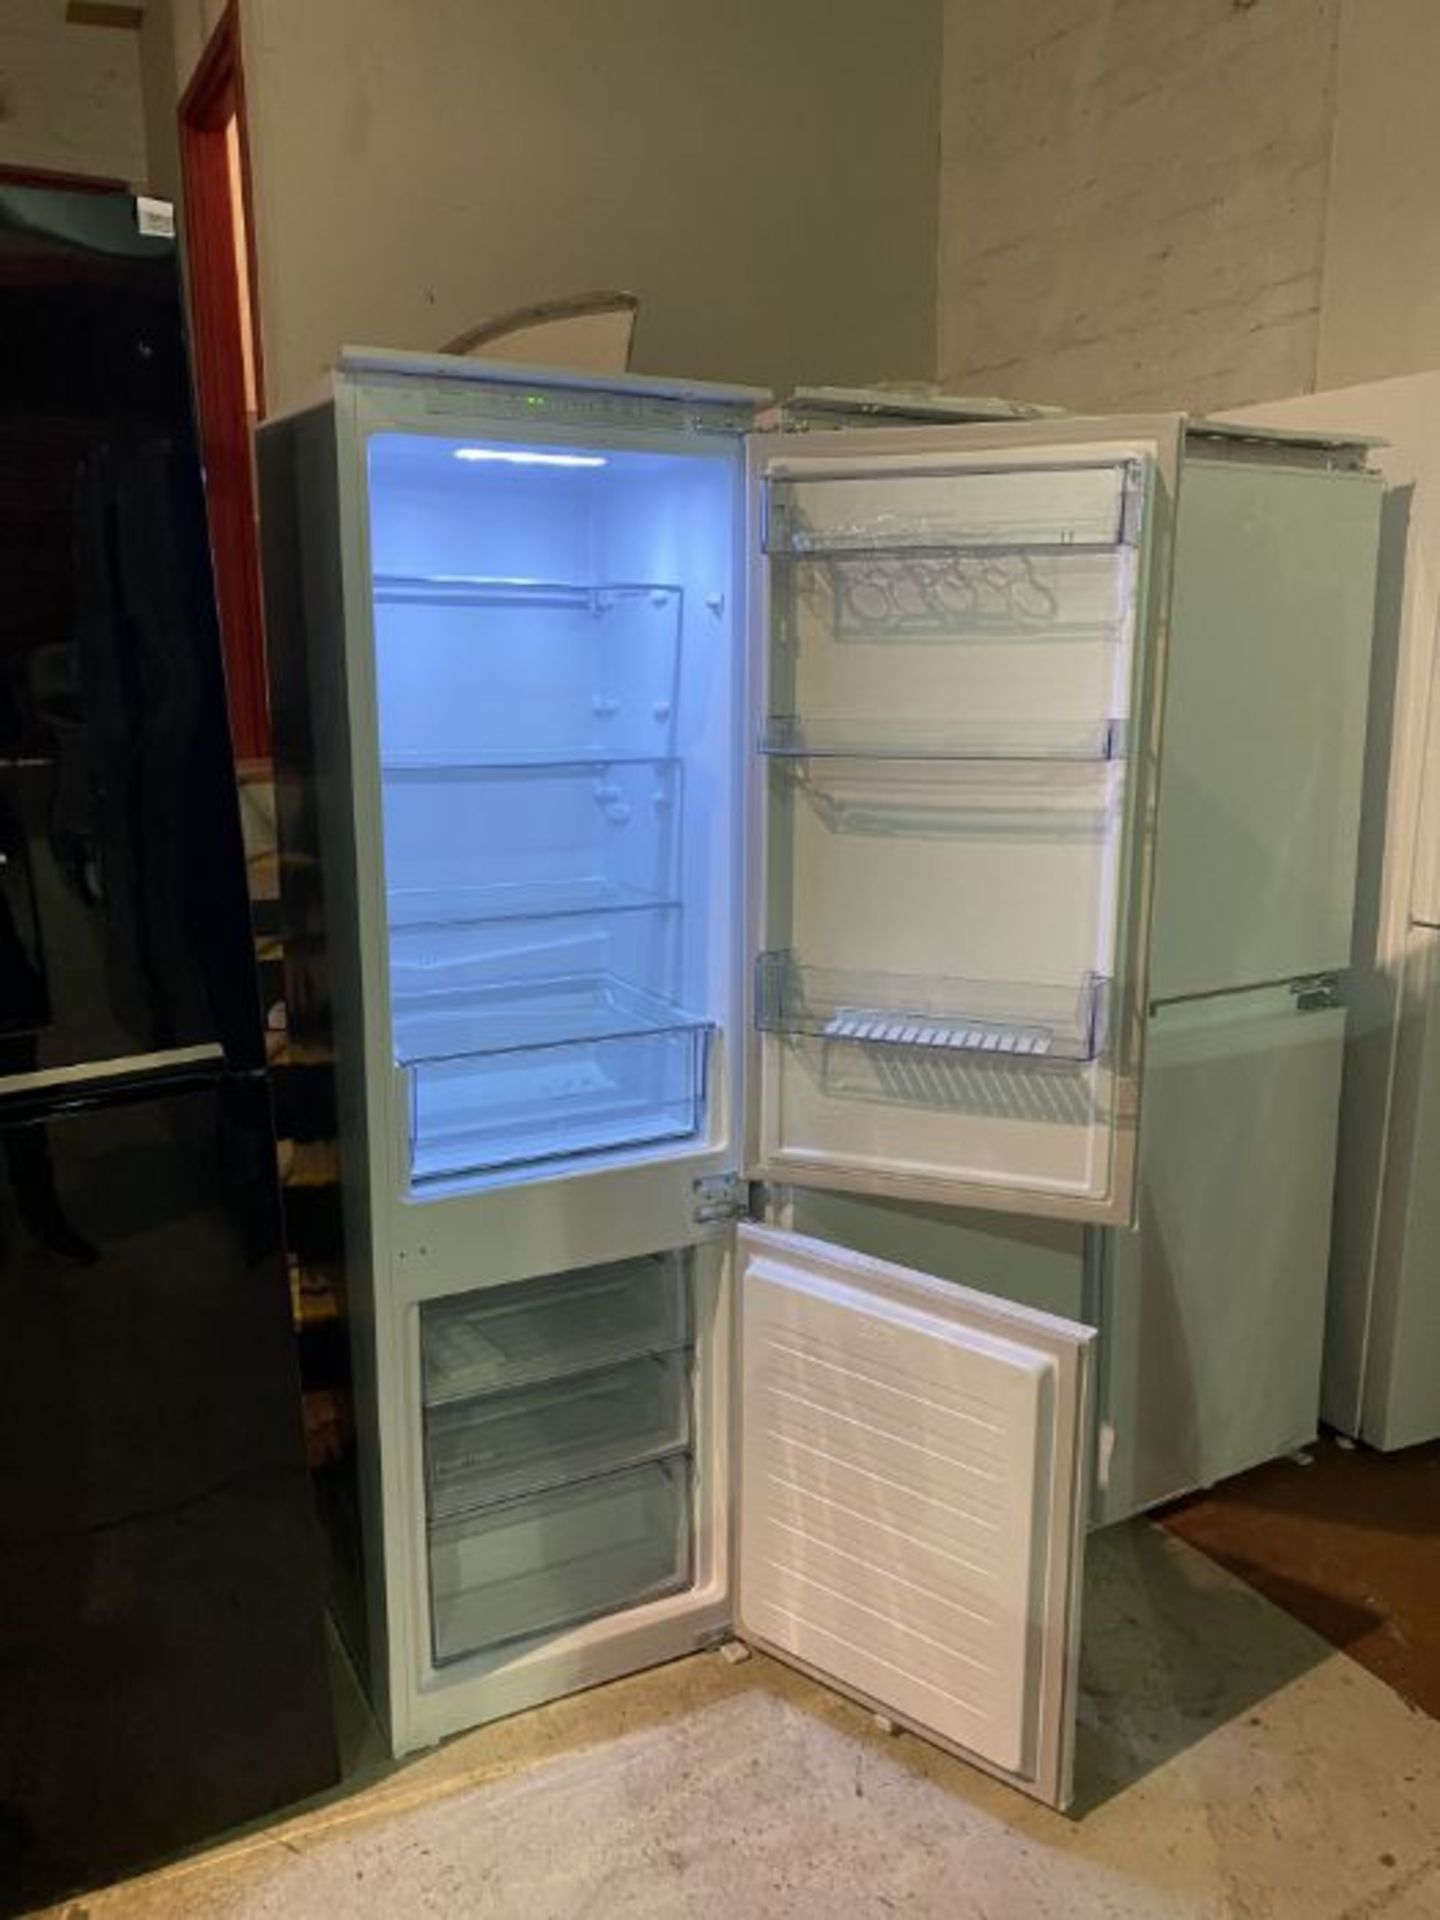 KENWOOD INTEGRATED FROST FREE FRIDGE FREEZER - KIFF7020 (OPENS TO THE RIGHT) - Image 4 of 5